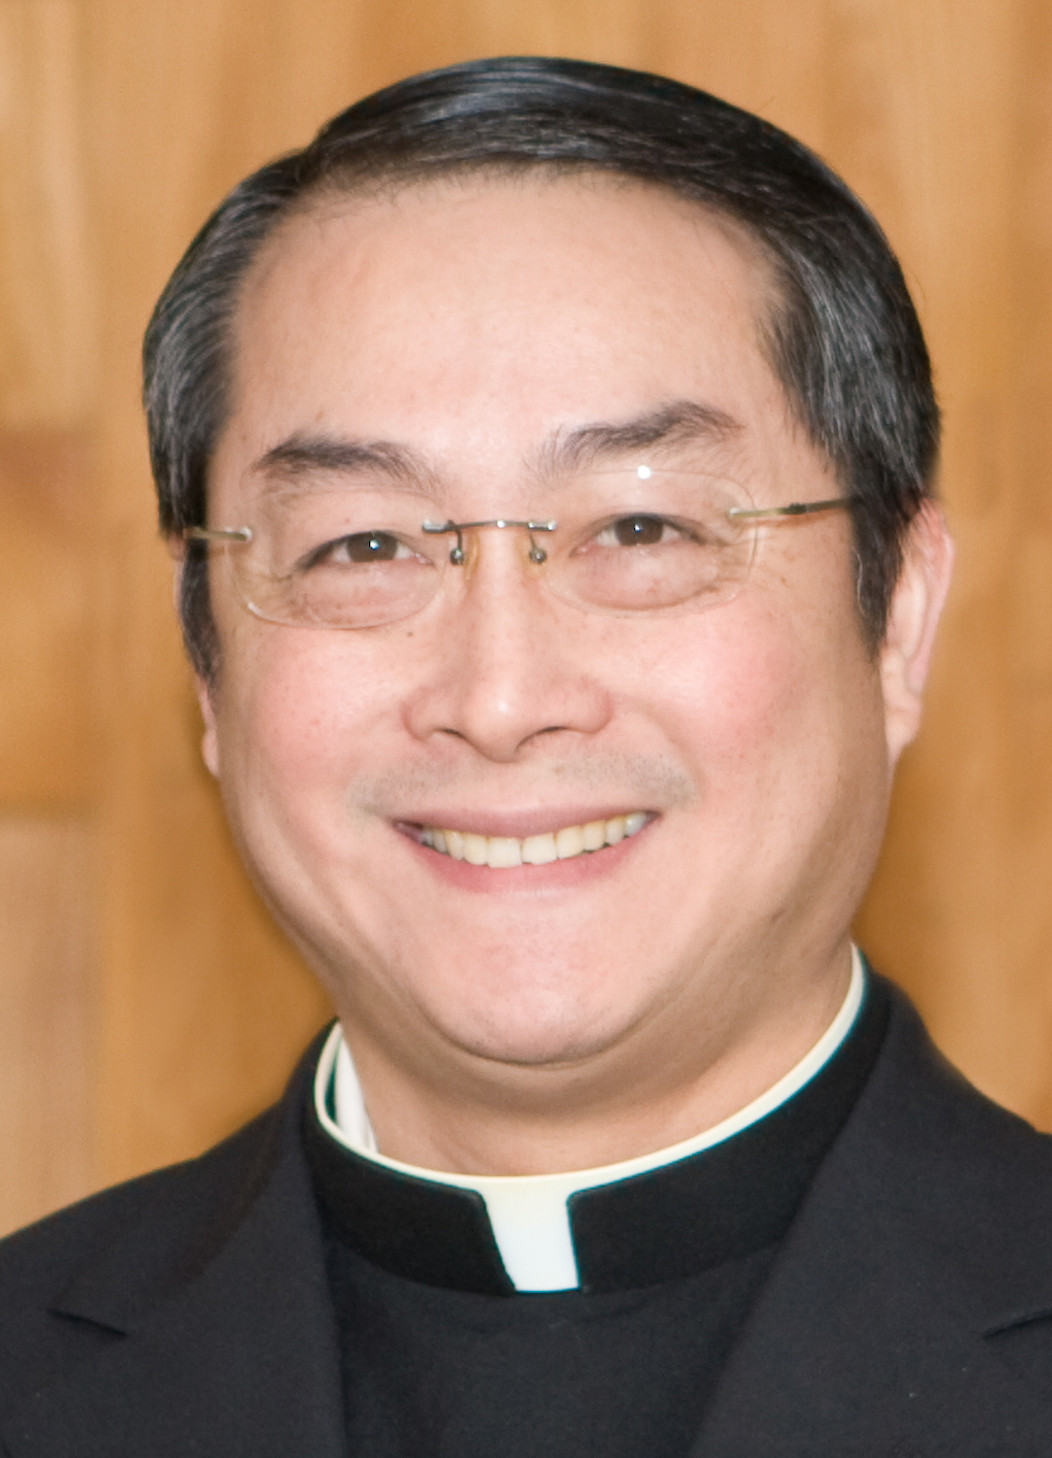 The Rev. Quang Duc Dinh, head of the Society of the Divine Word’s Chicago province, based in the north suburbs.